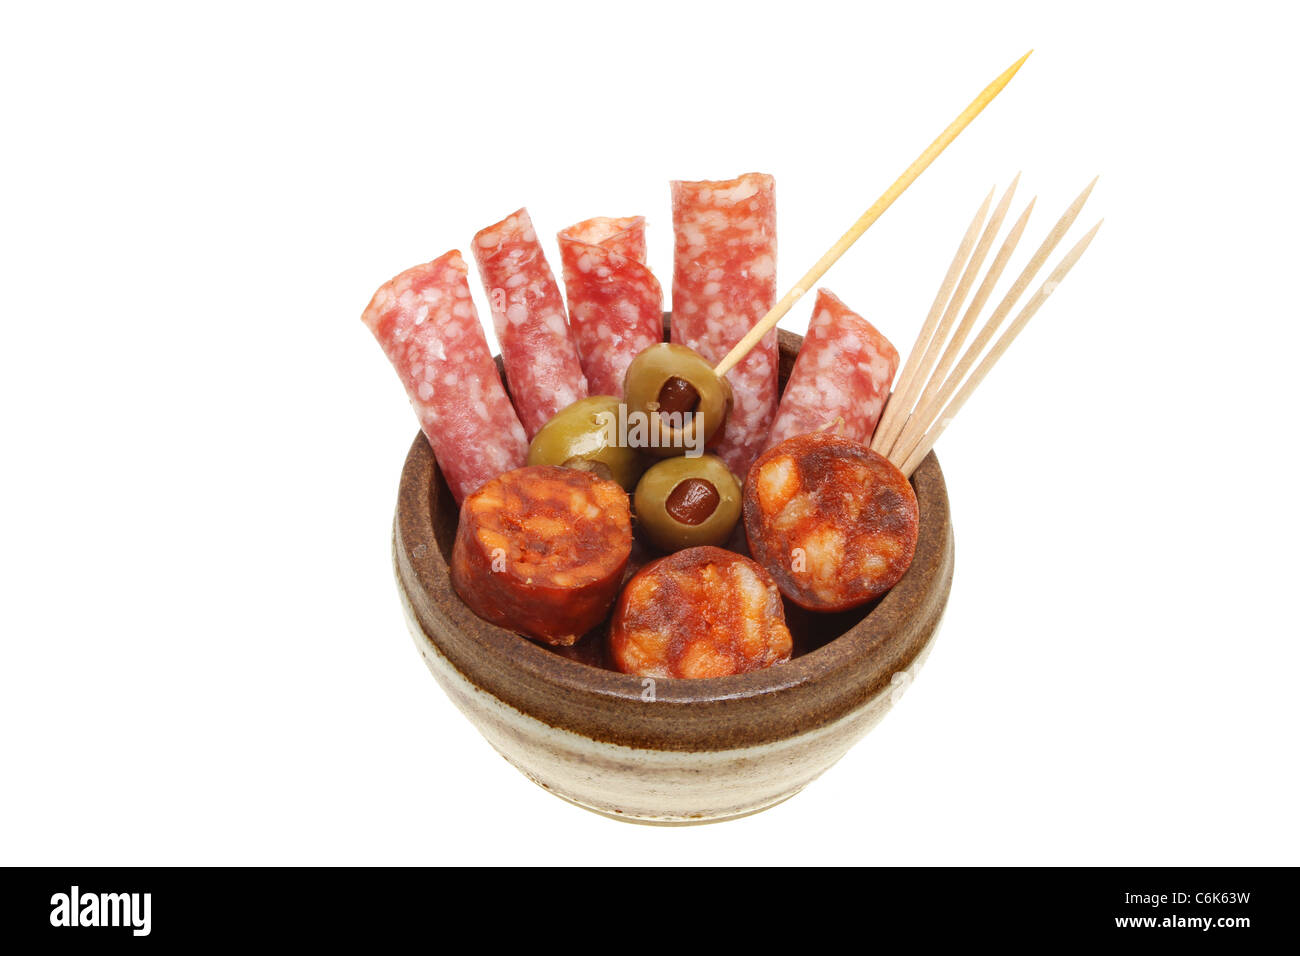 Salami and chorizo sausage in a bowl with stuffed olives and cocktail sticks Stock Photo